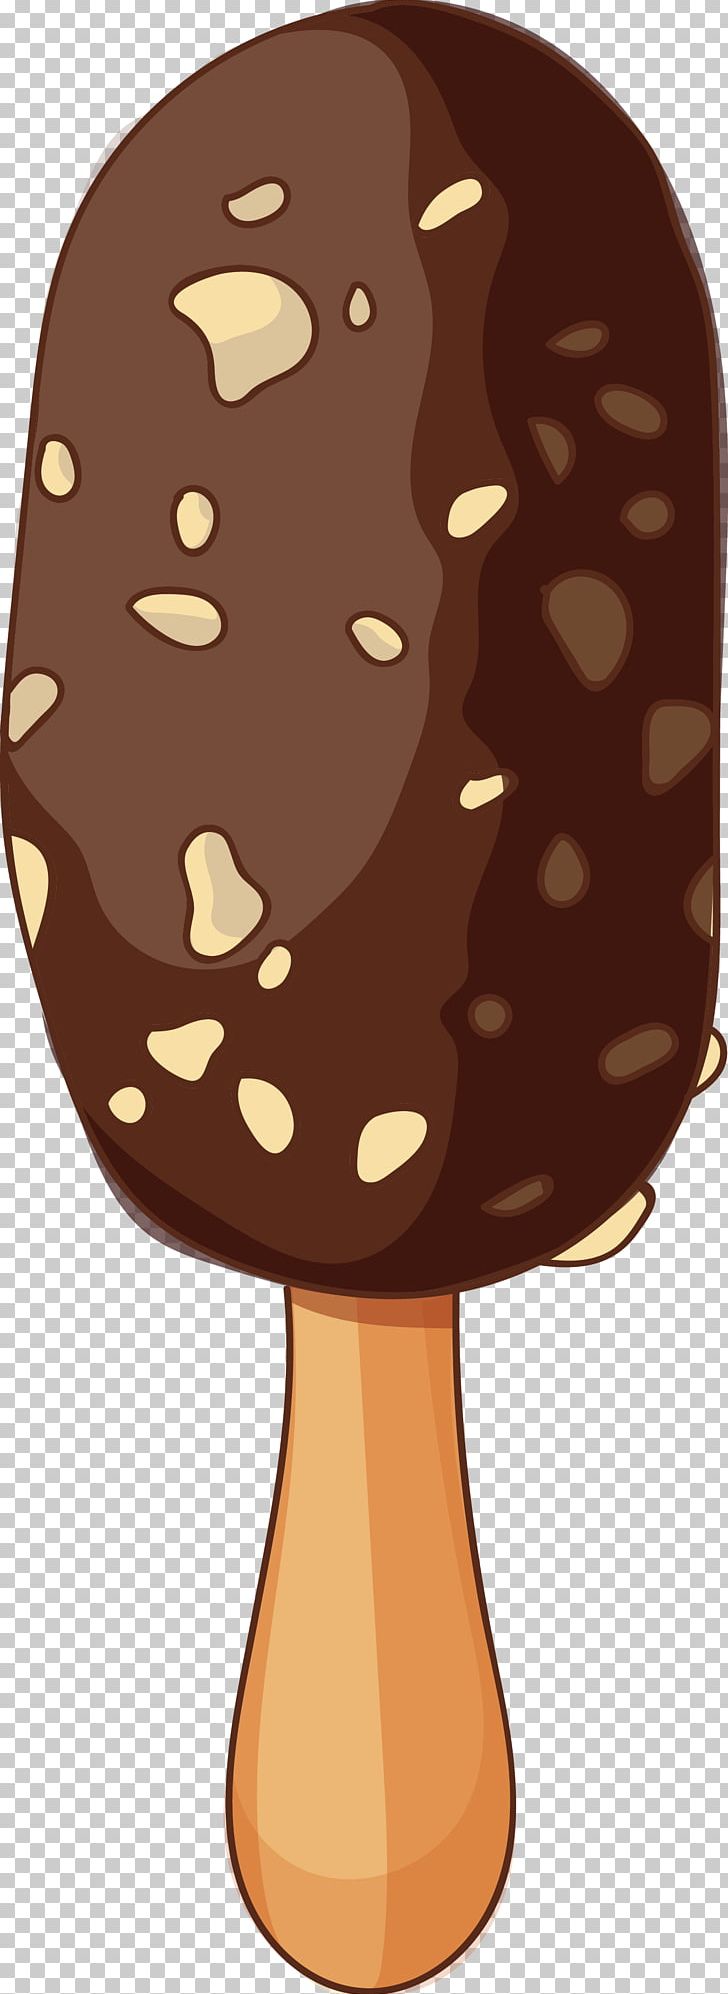 Chocolate Ice Cream Ice Pop PNG, Clipart, Brown, Chocolate, Chocolate Bar, Chocolate Cake, Chocolate Ice Cream Free PNG Download